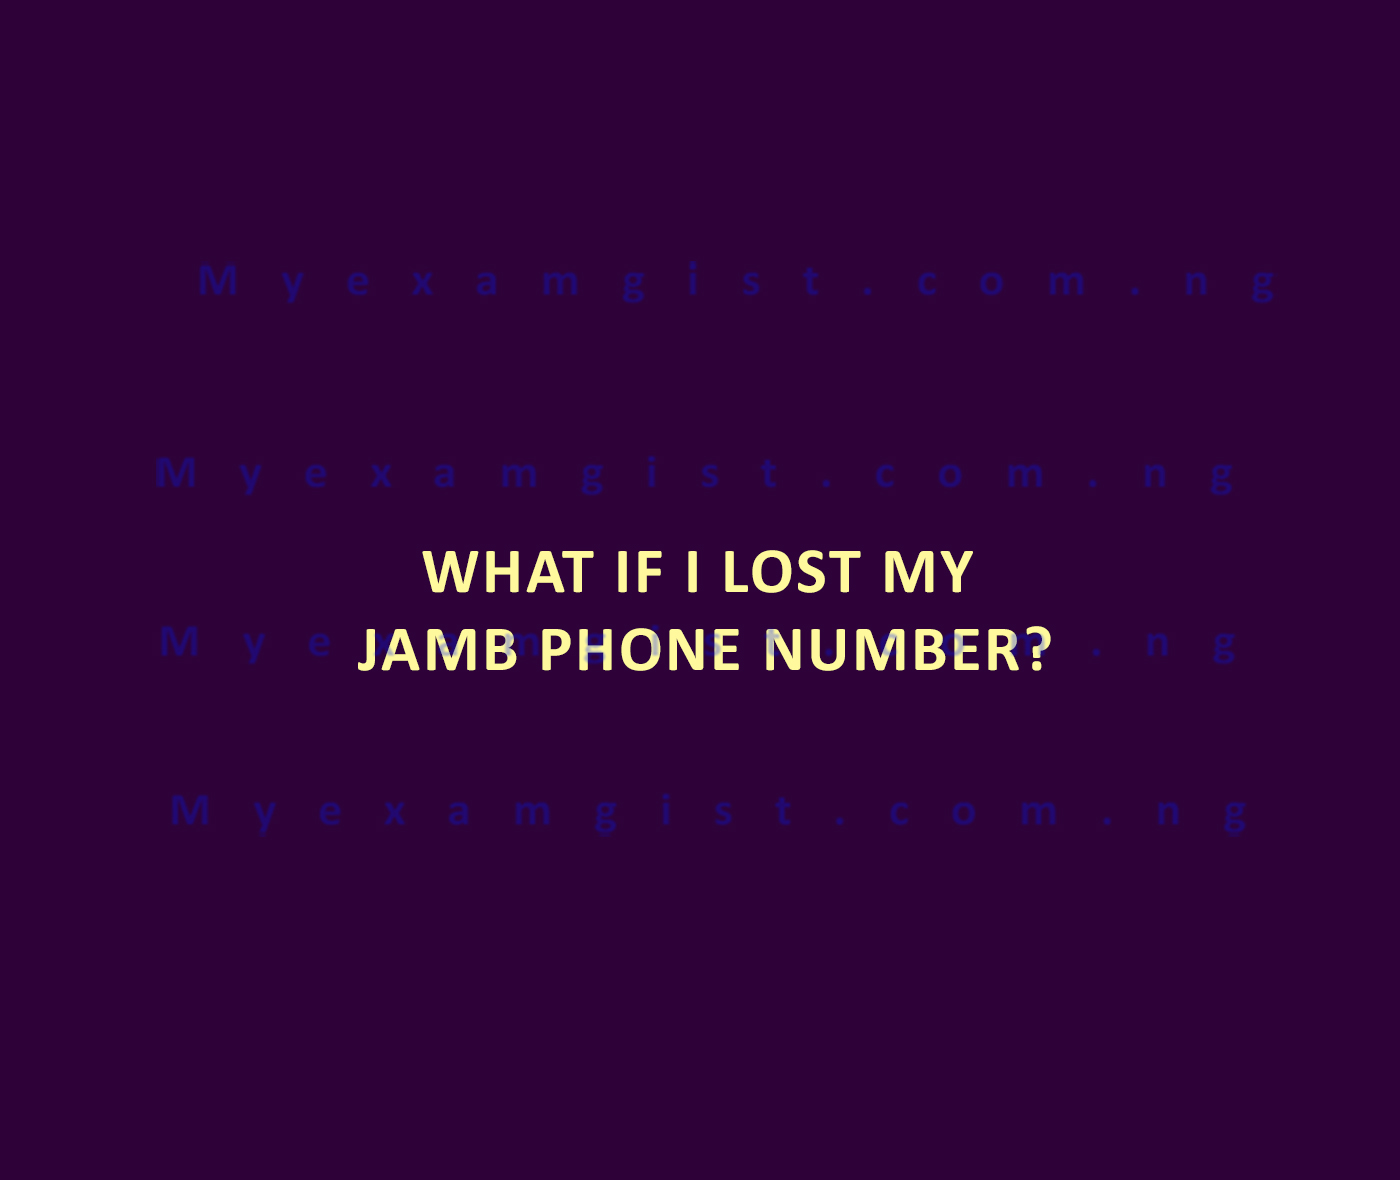 What if I lost my JAMB phone number?